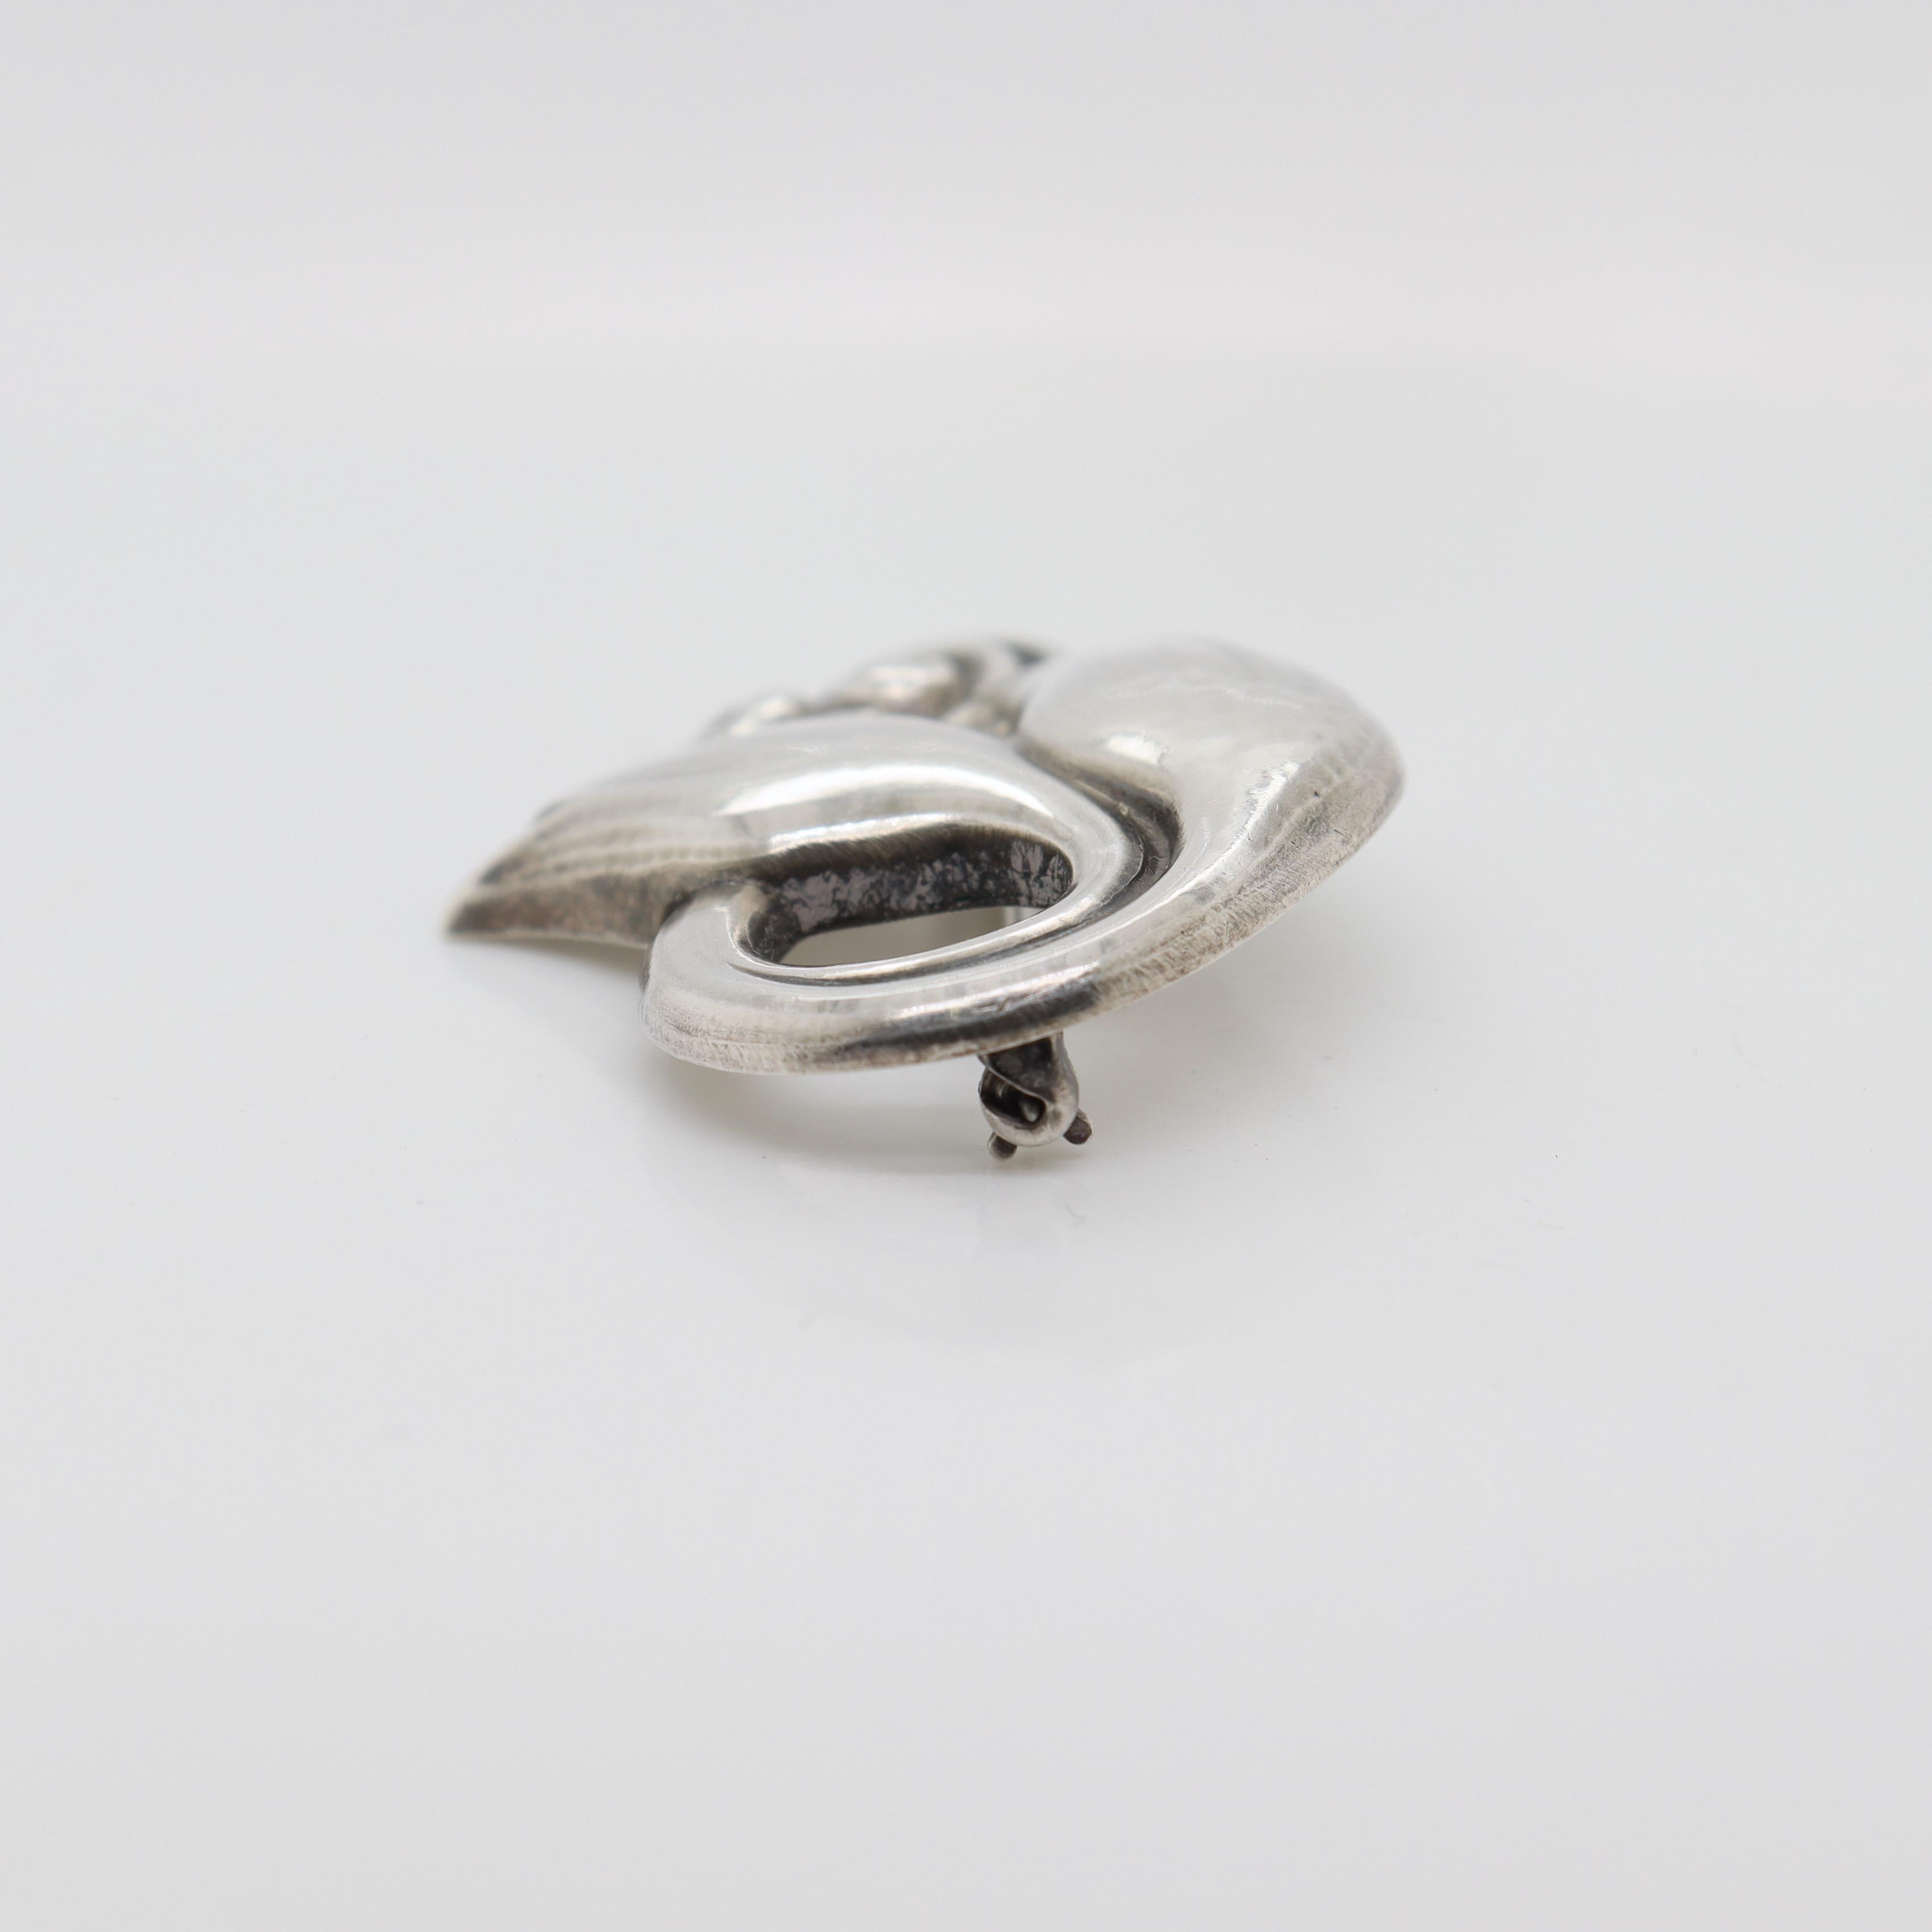 Georg Jensen Sterling Silver Tulip Brooch No. 100A In Good Condition For Sale In Philadelphia, PA